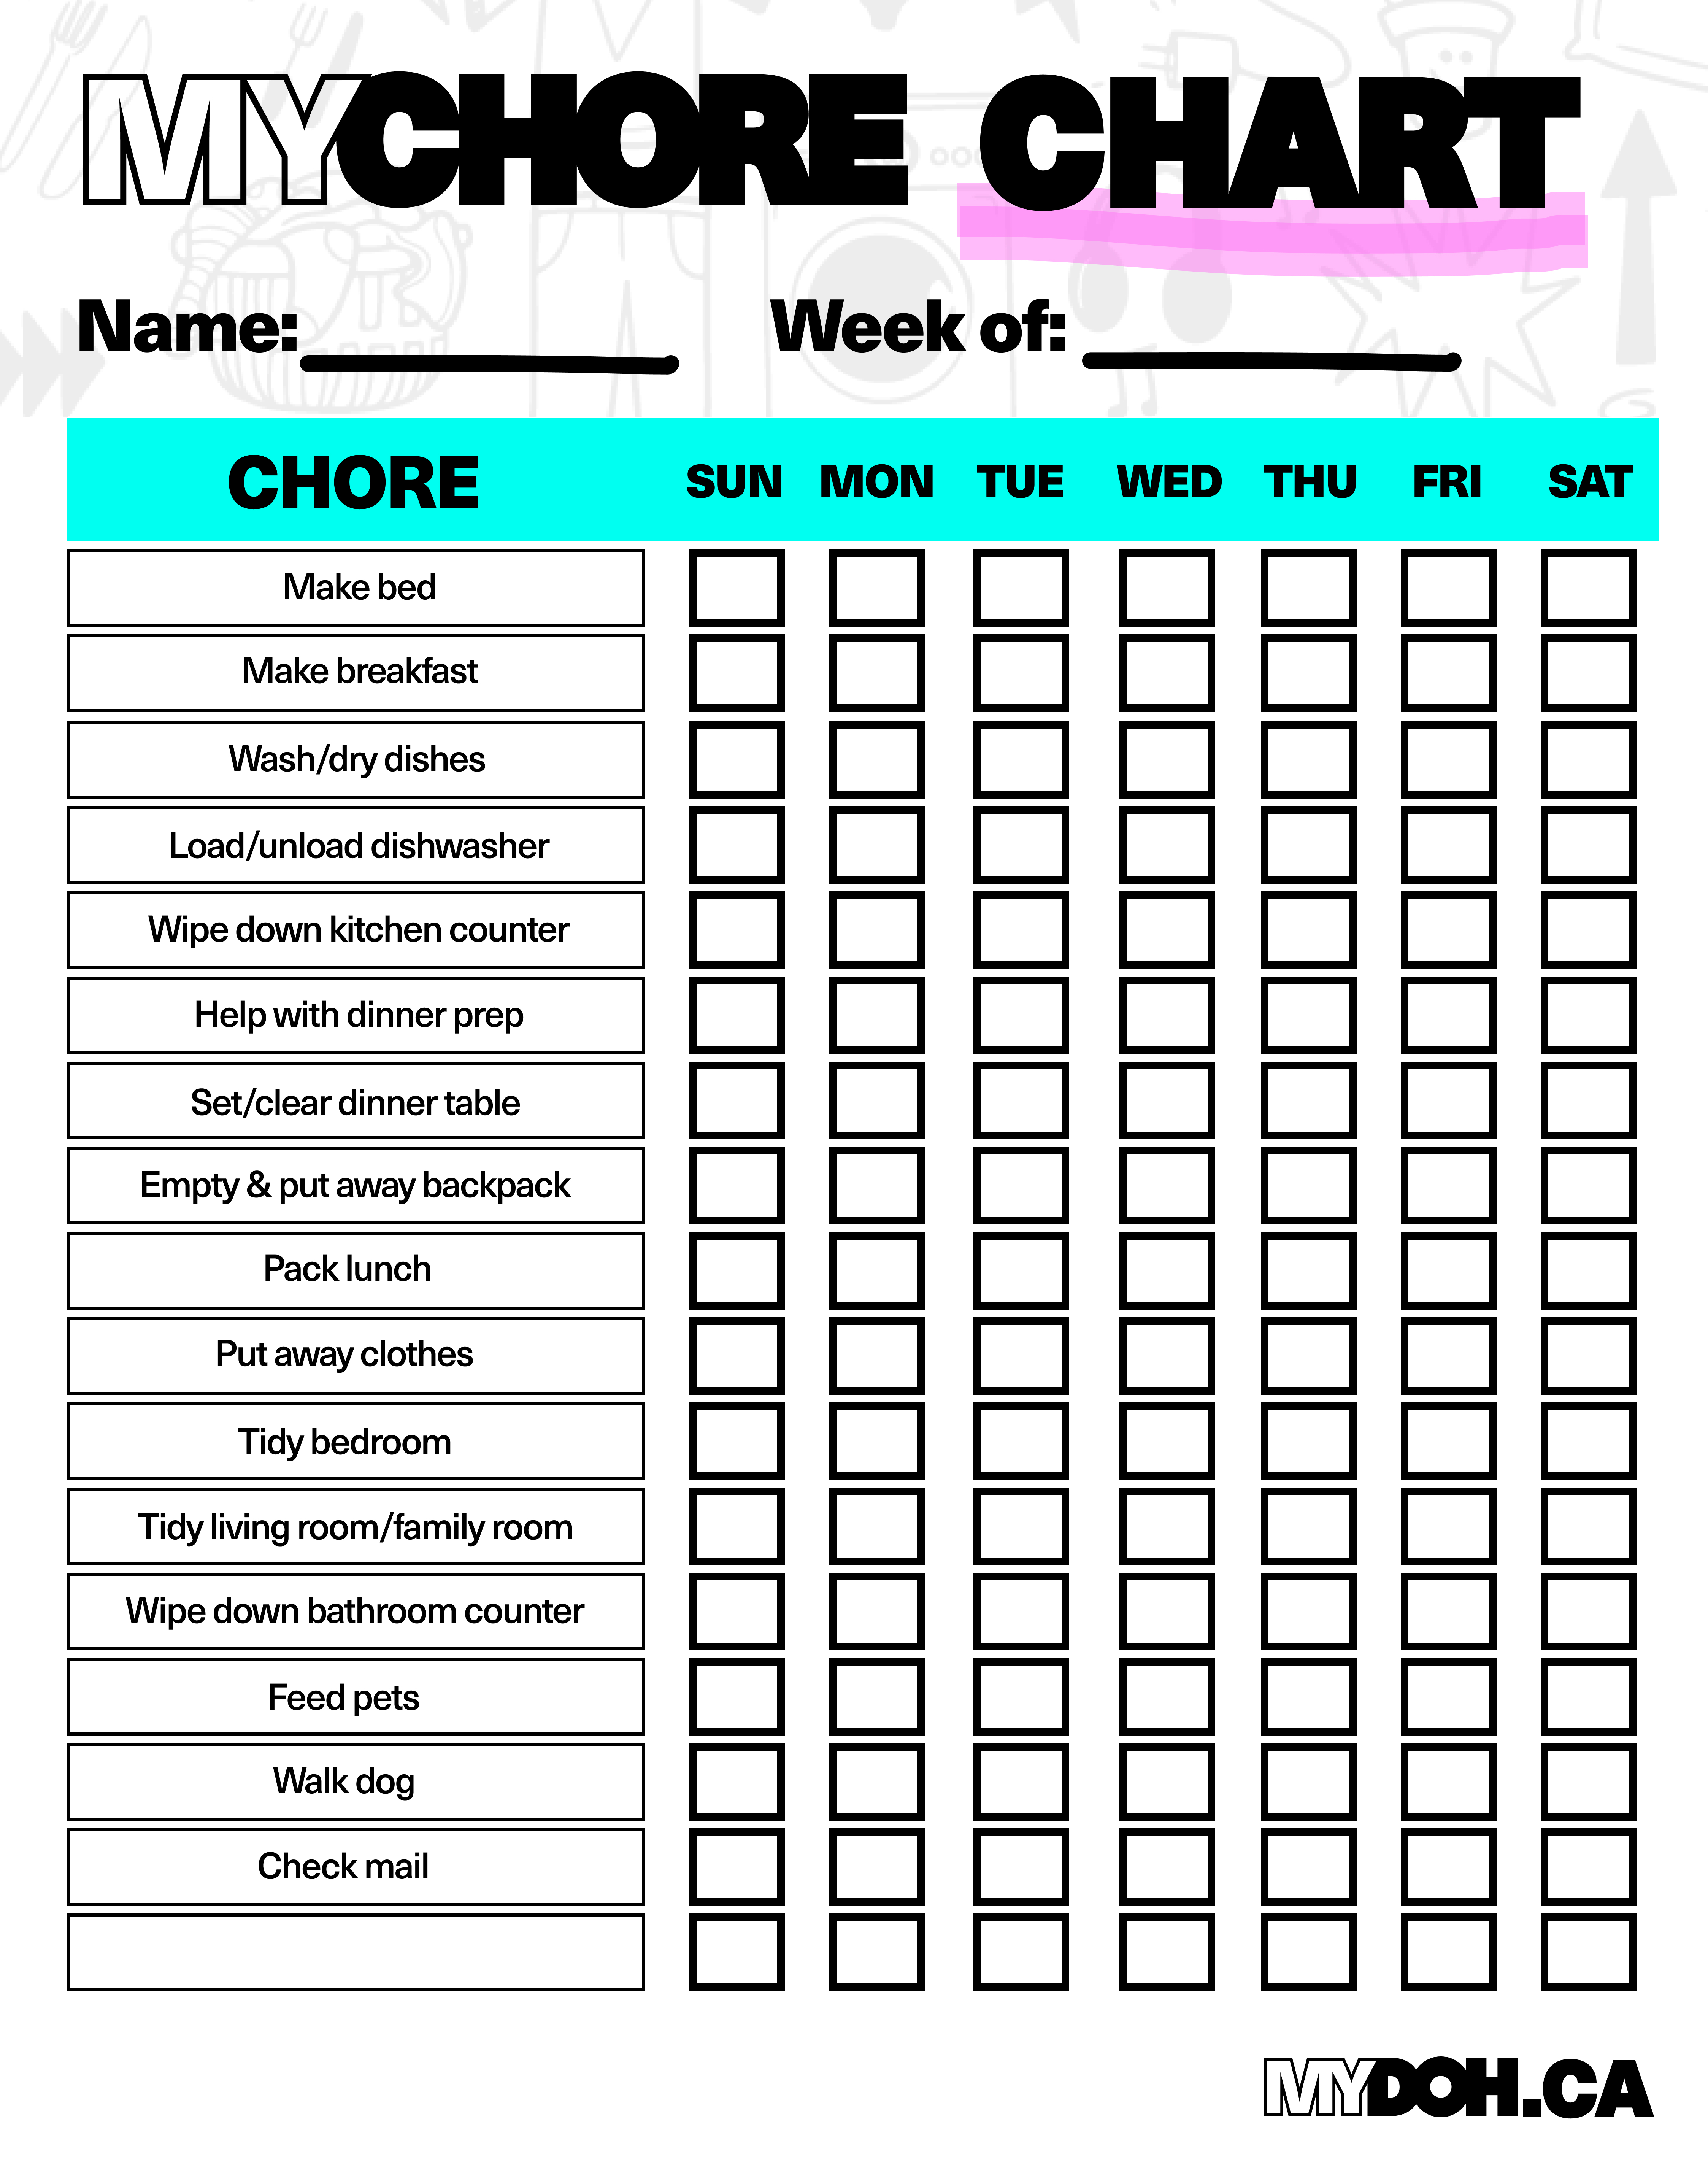 paper-party-kids-clip-art-image-files-weekly-chores-checklist